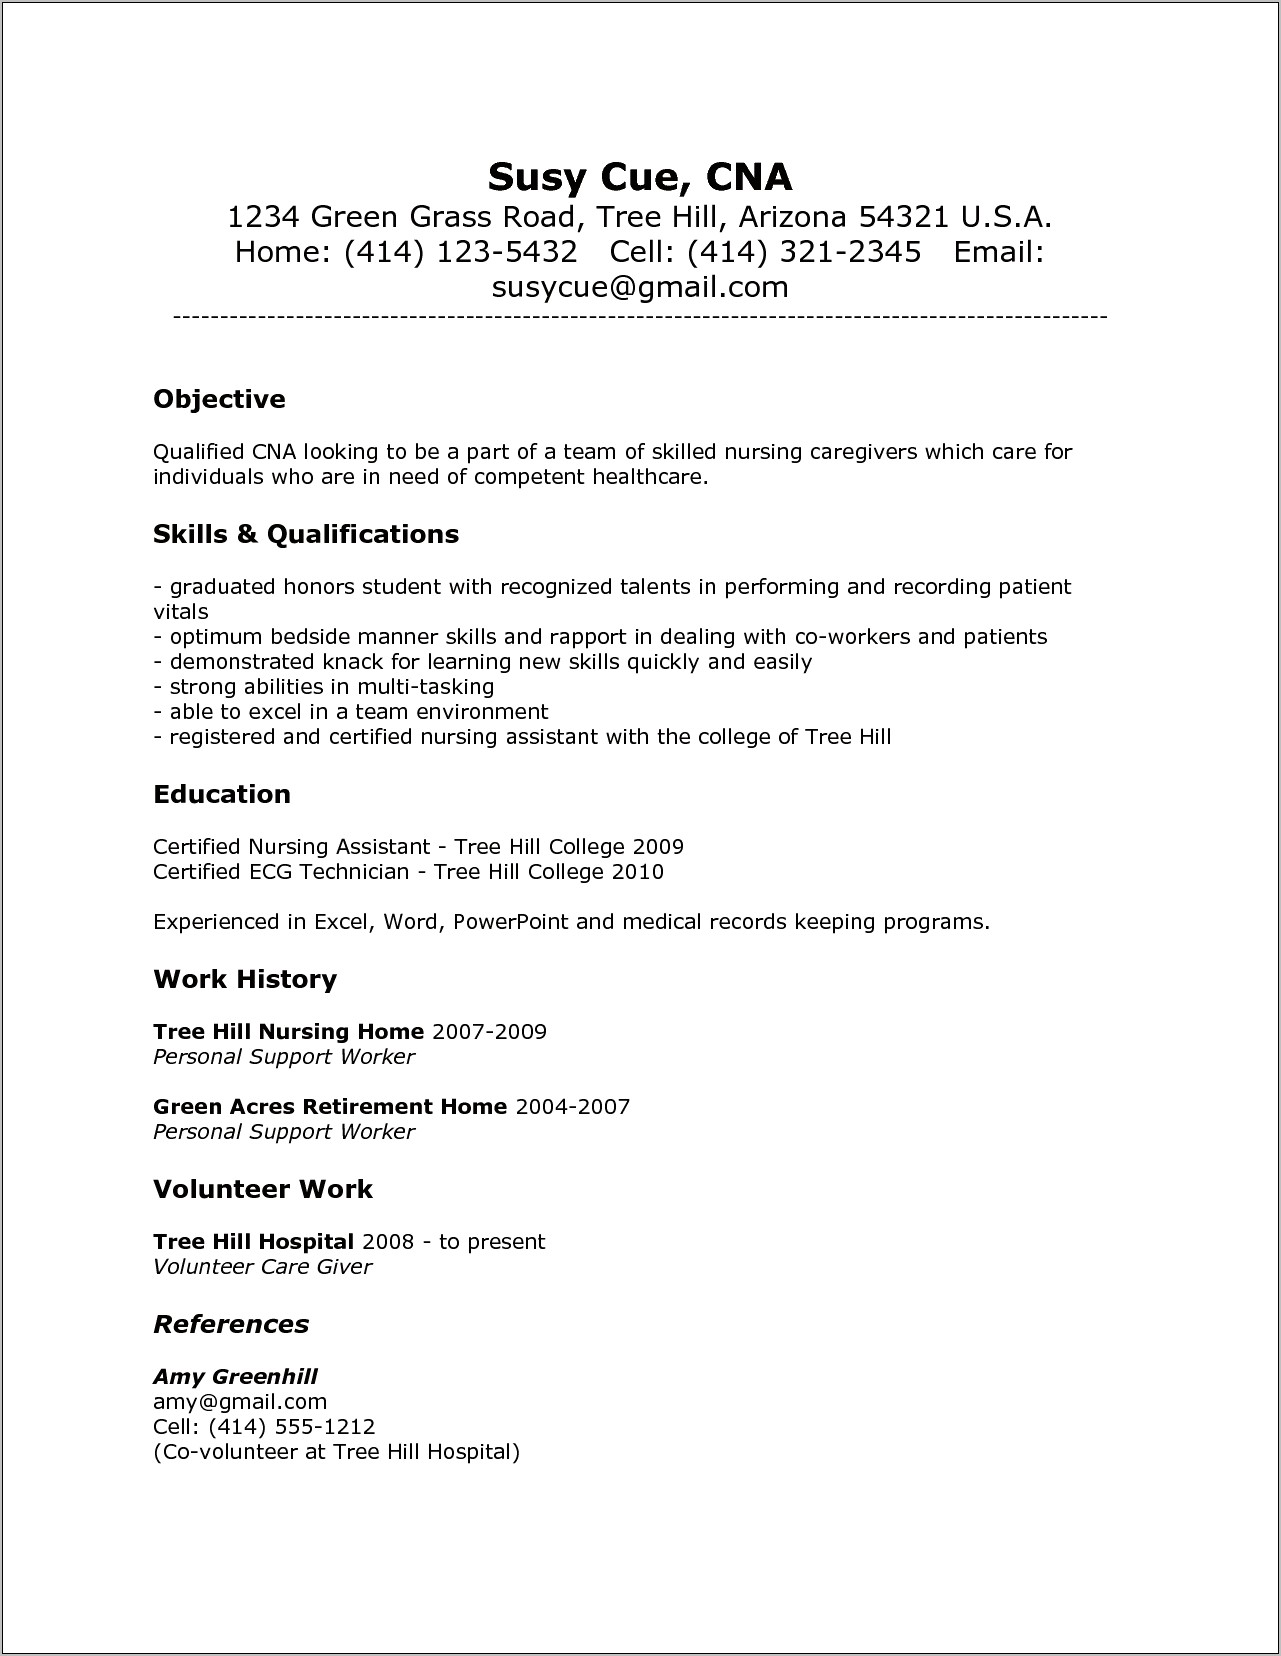 Nursing Student Looking For Job Objective On Resume